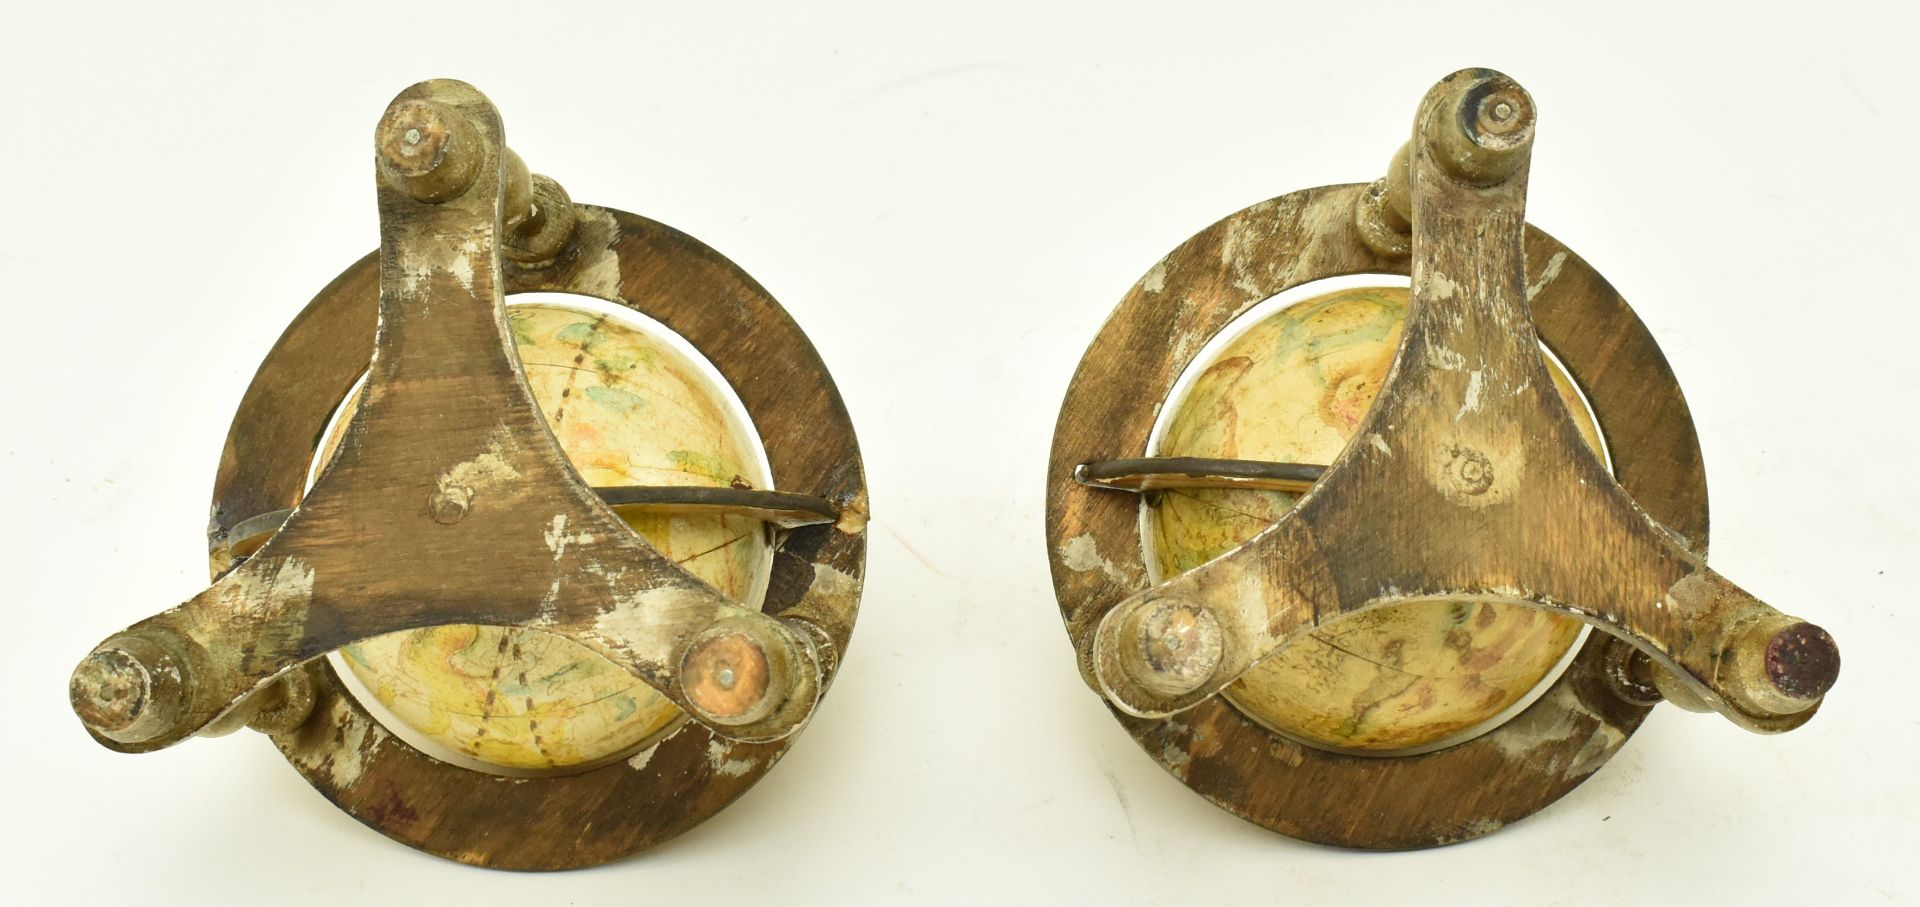 PAIR OF EARLY 20TH CENTURY METAL & WOOD CELESTIAL GLOBES - Image 6 of 6